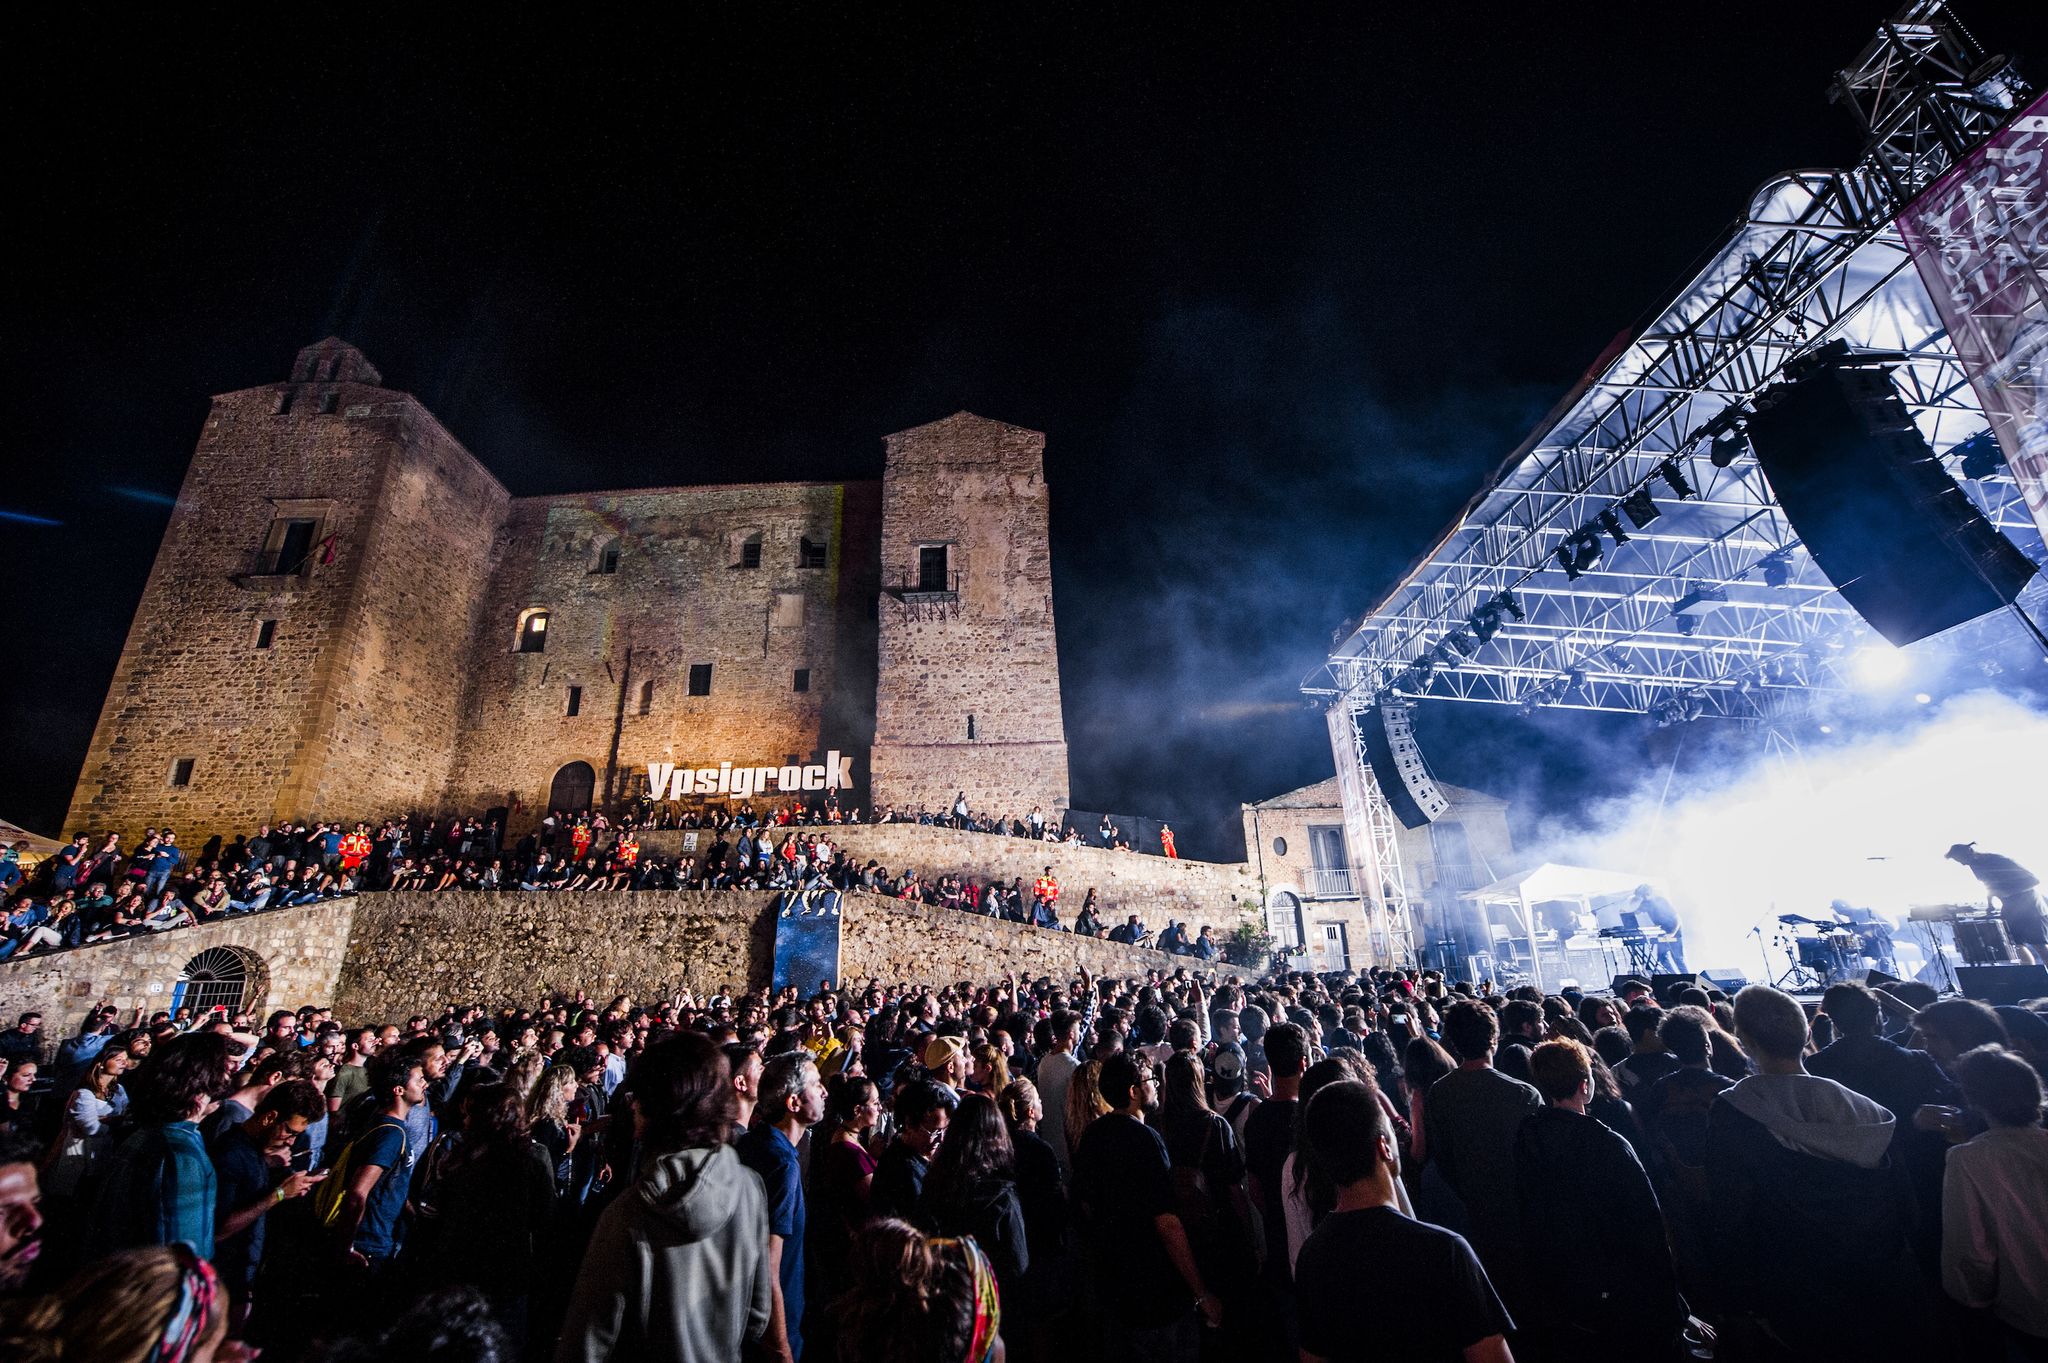 People, Crowd, Stage, Event, Performance, Night, Castle, Architecture, Audience, Photography, 